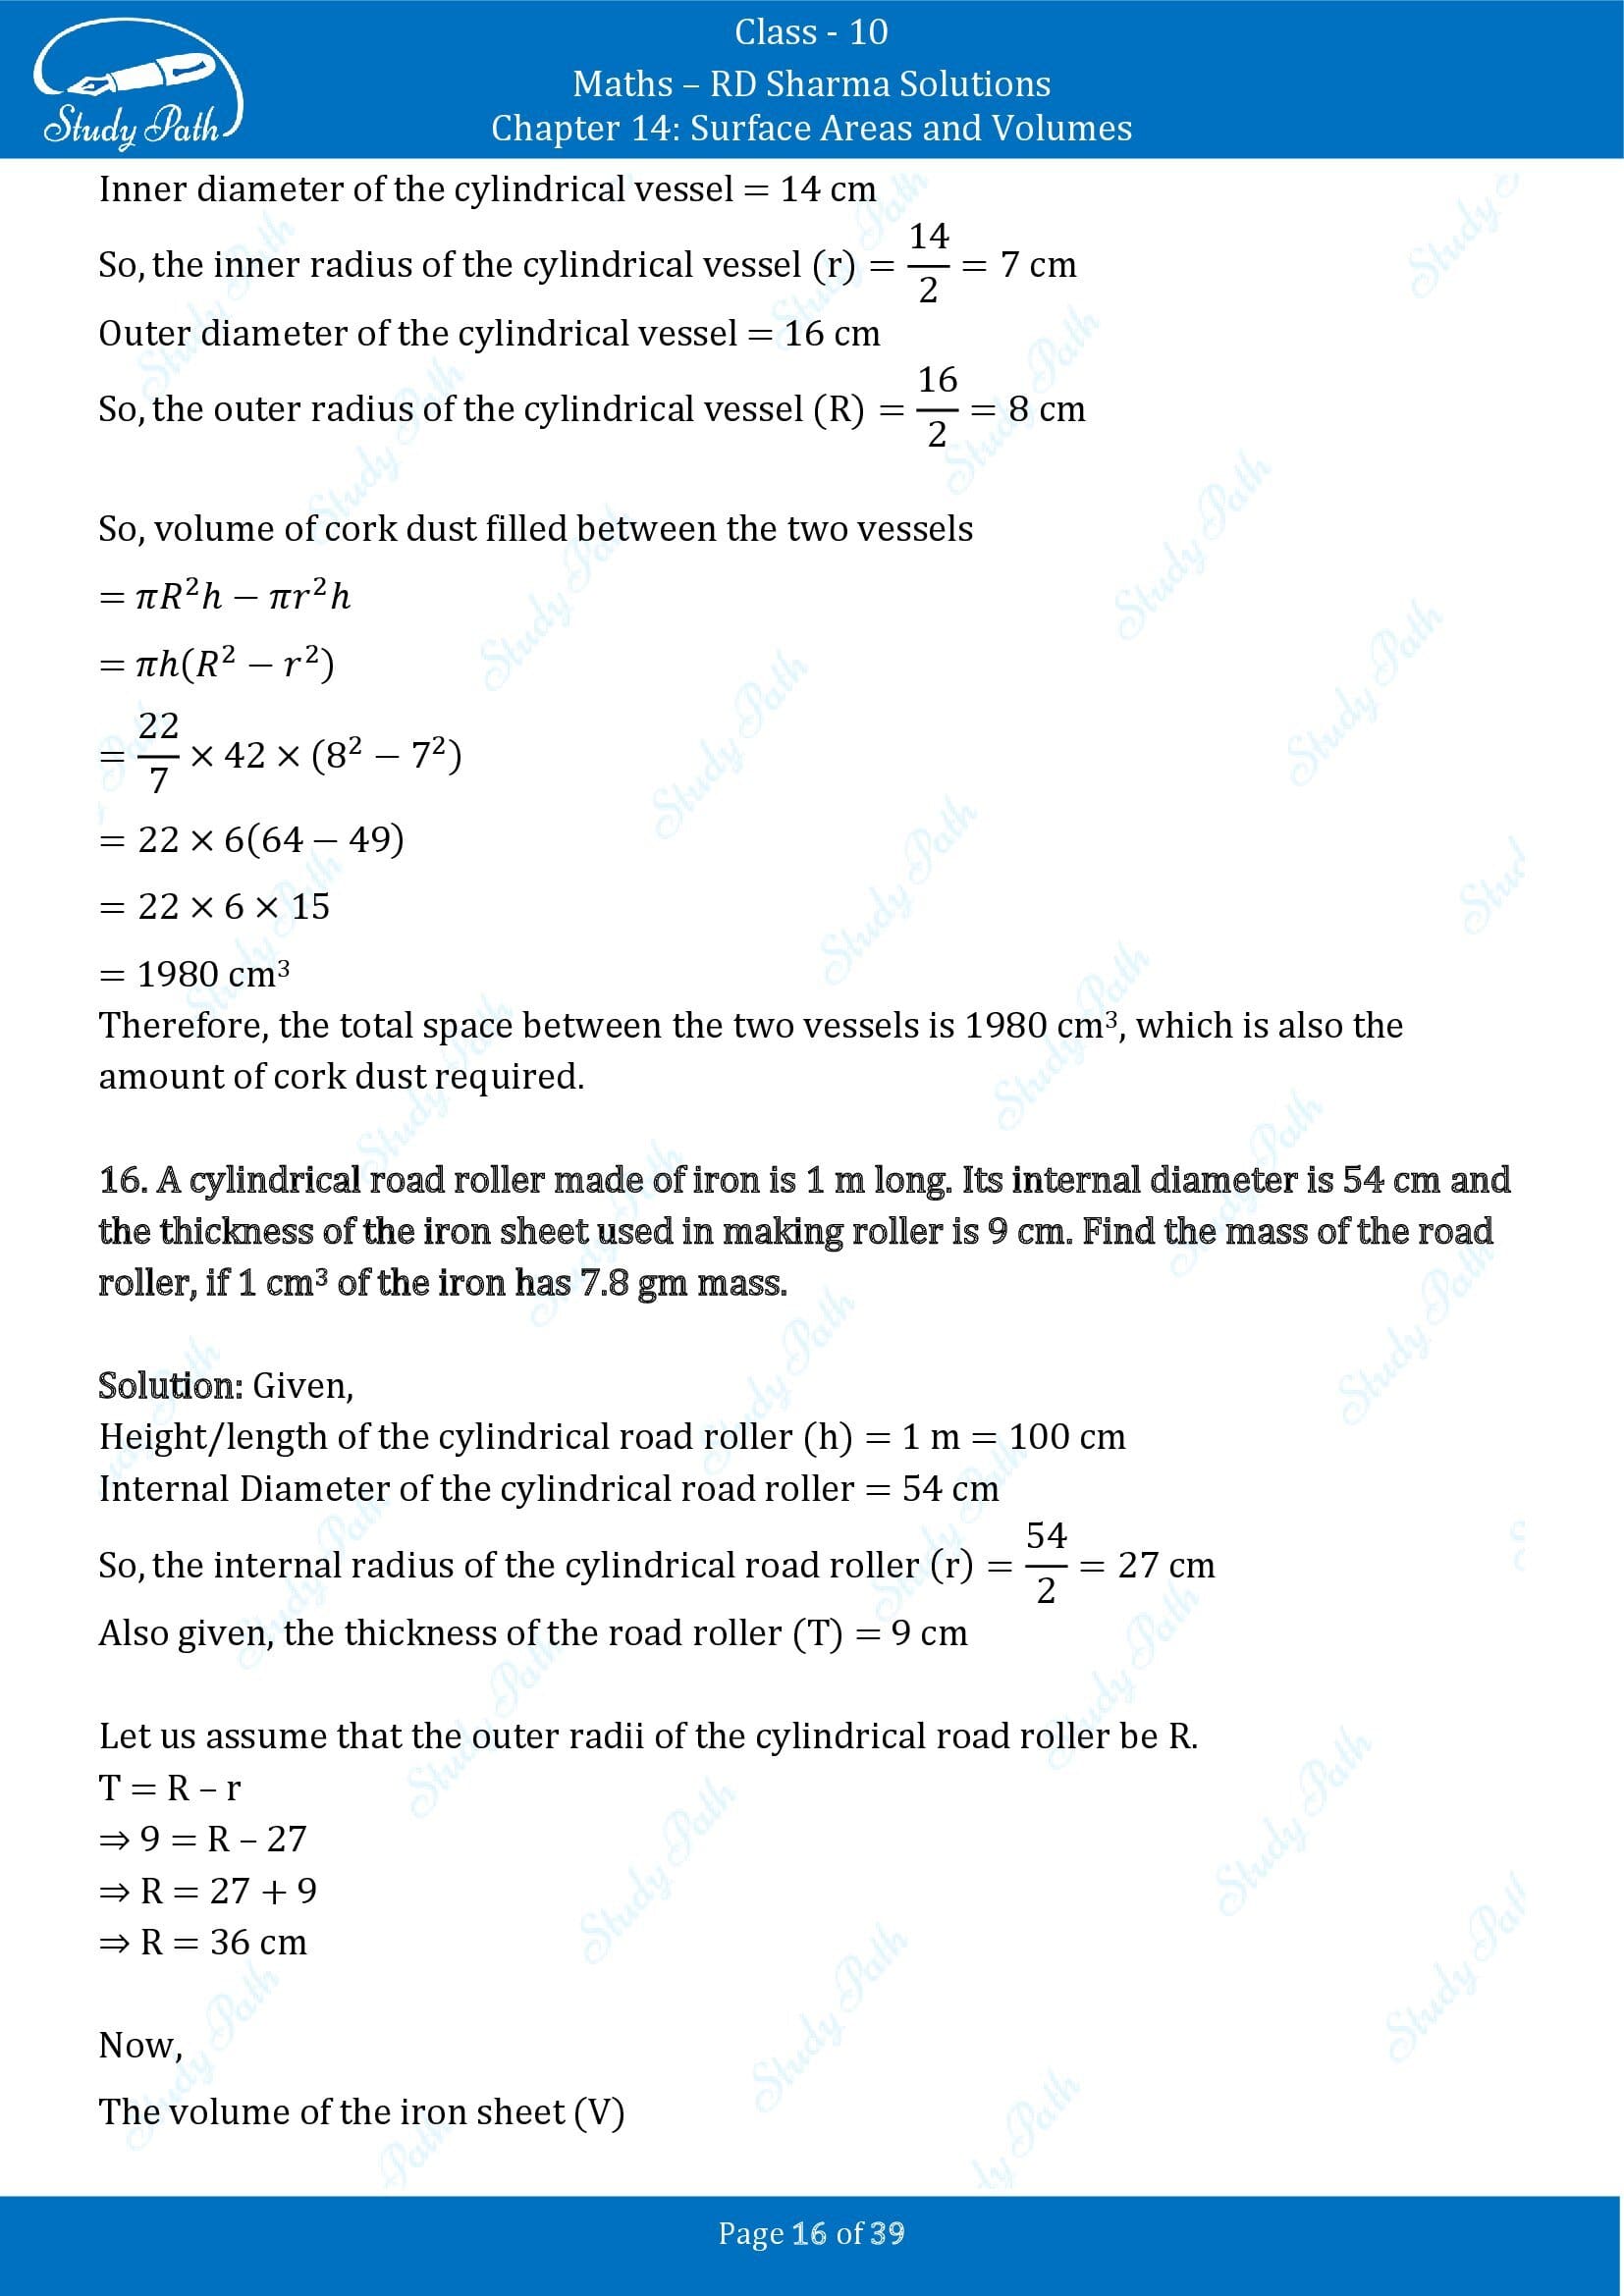 RD Sharma Solutions Class 10 Chapter 14 Surface Areas and Volumes Exercise 14.2 00016